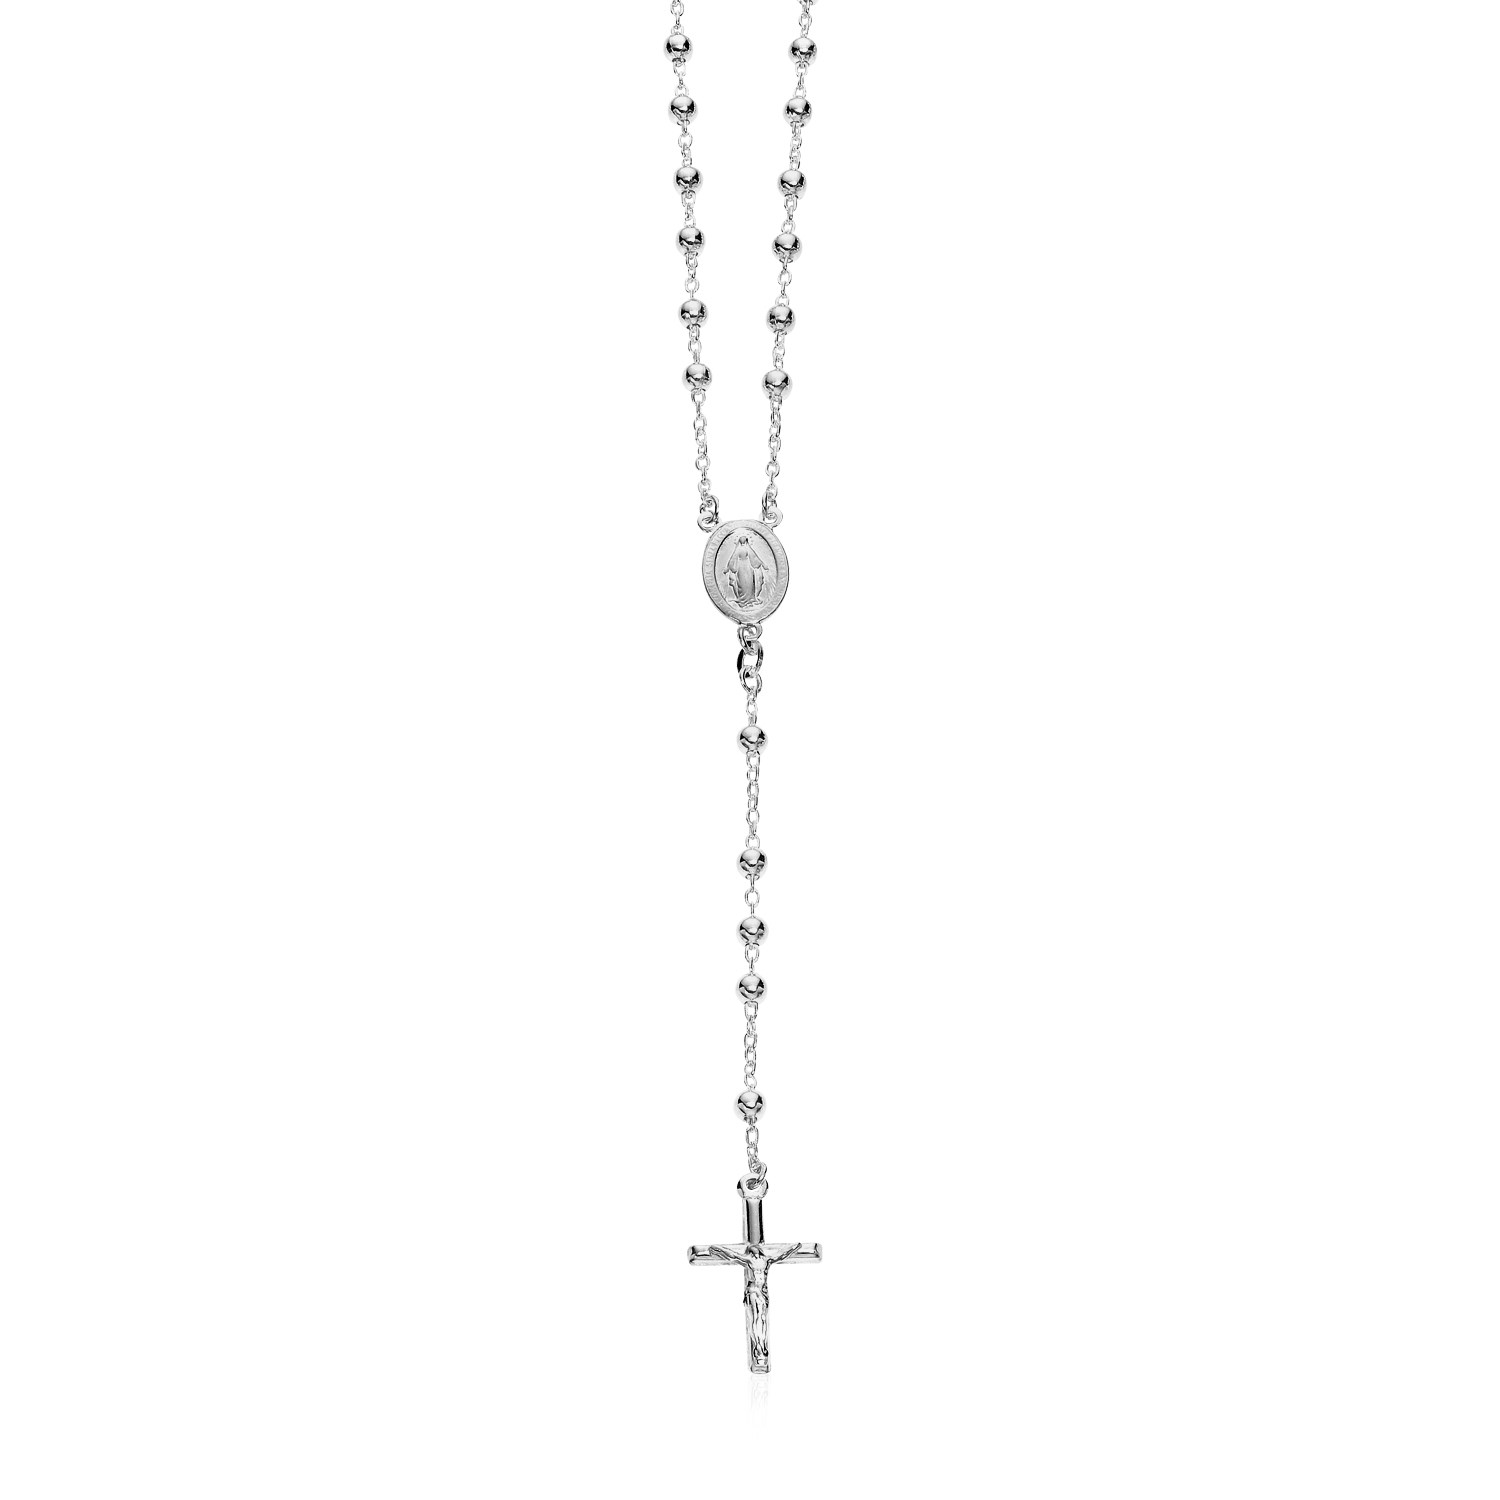 Polished Rosary Chain and Bead Necklace in Sterling Silver - Teach ...